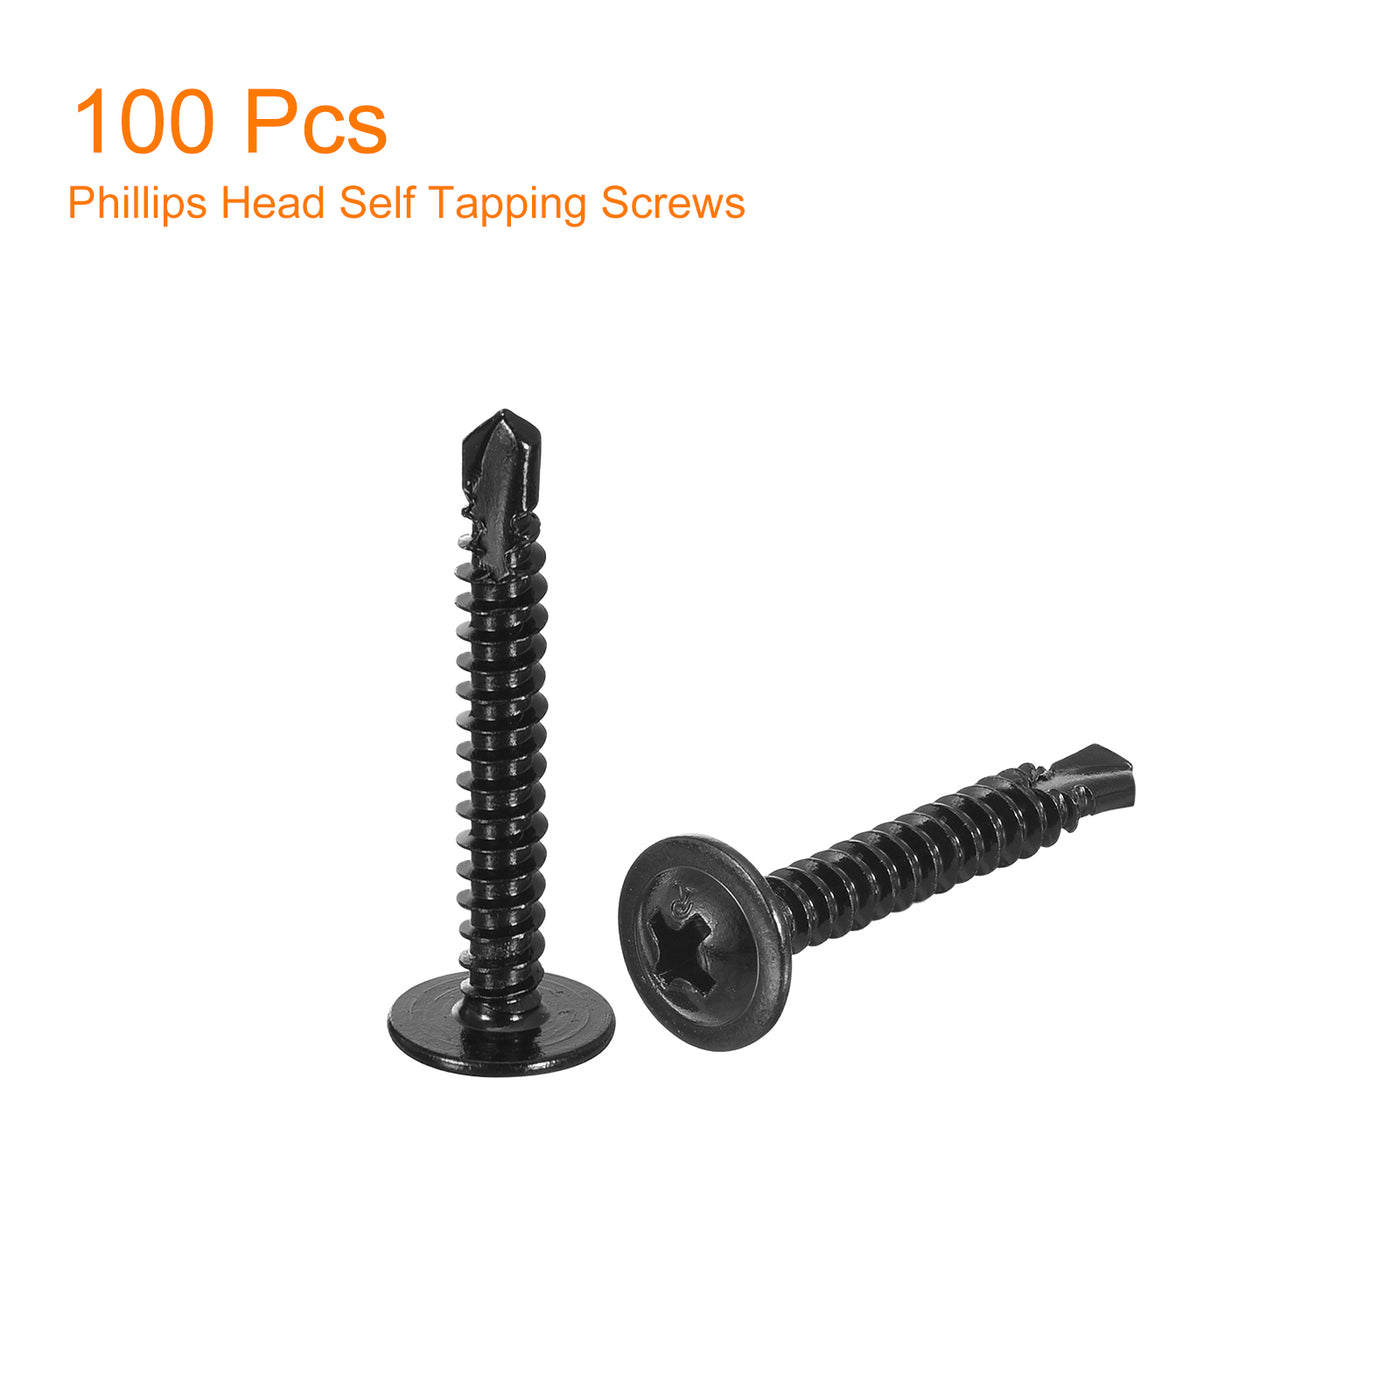 uxcell Uxcell Phillips Head Self Tapping Screws, 100pcs #8x1-1/4" Sheet Metal Screw